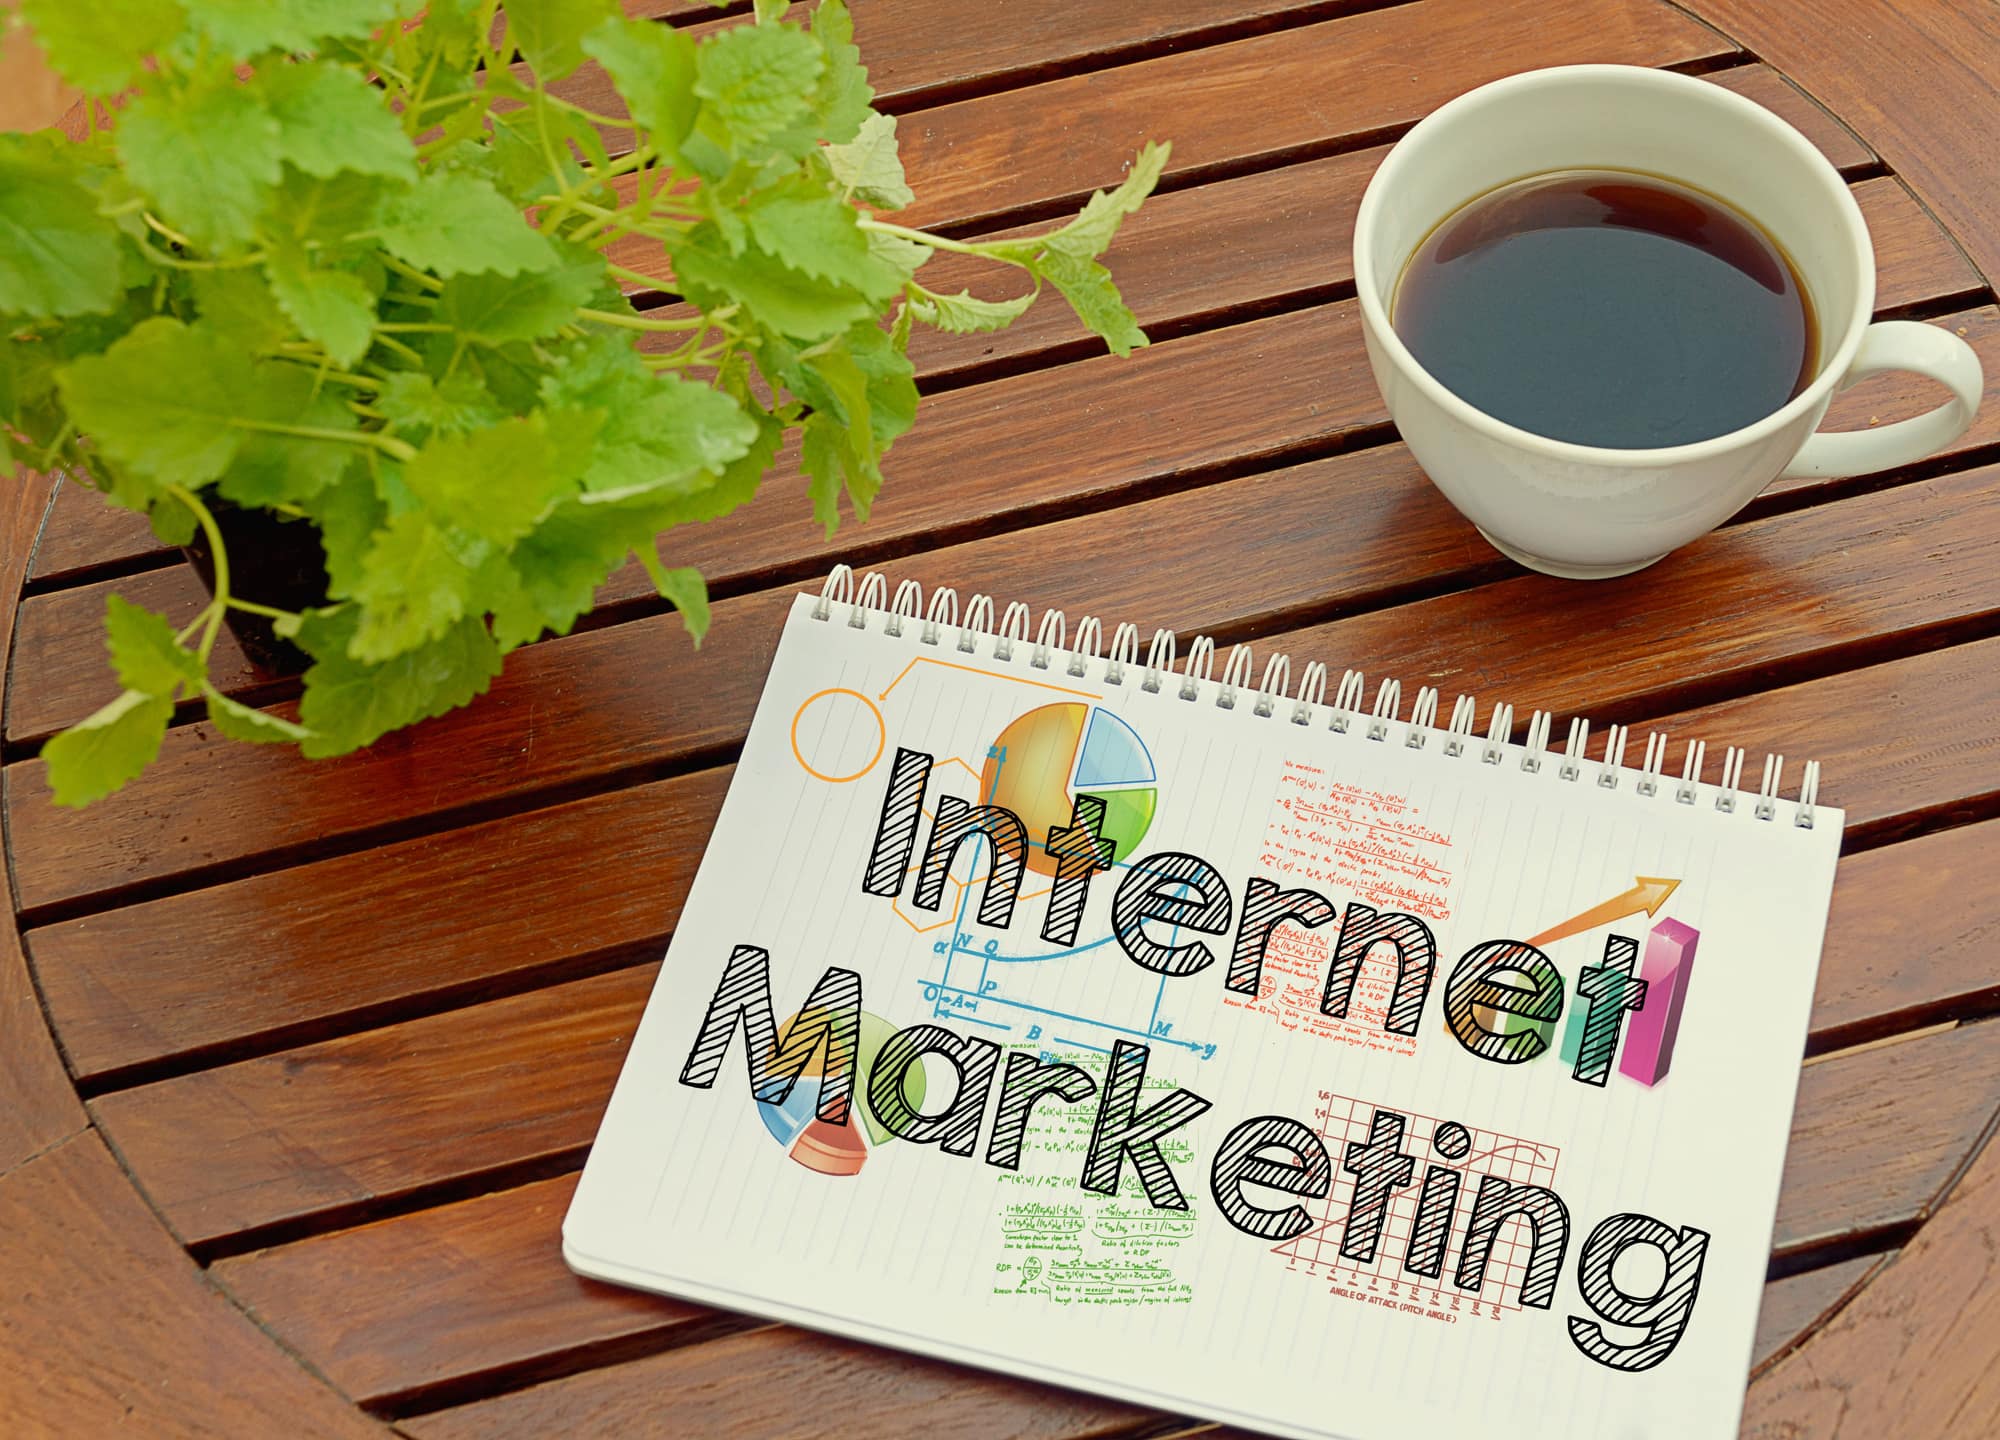 Does Your Business Need a Marketing Agency?